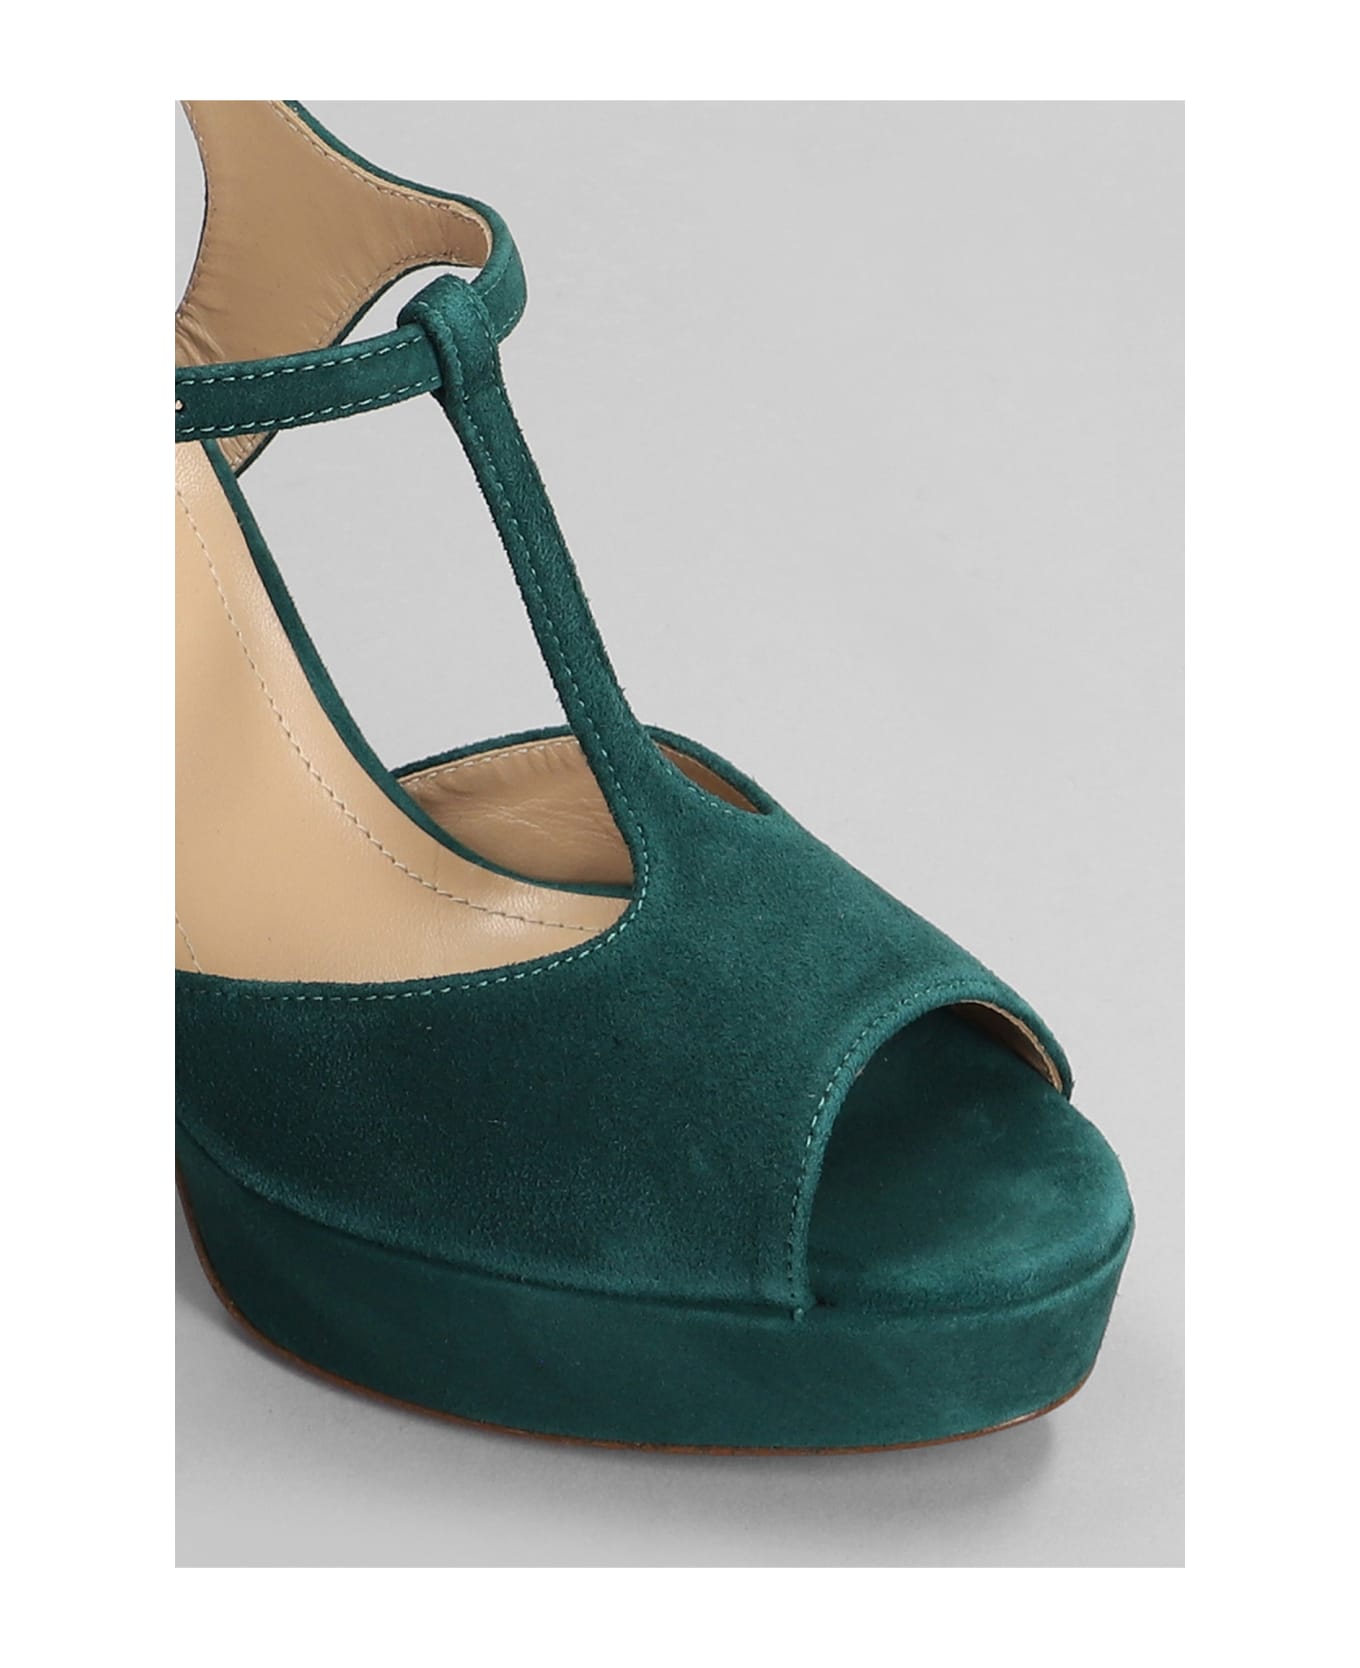 Relac Sandals In Green Suede - green